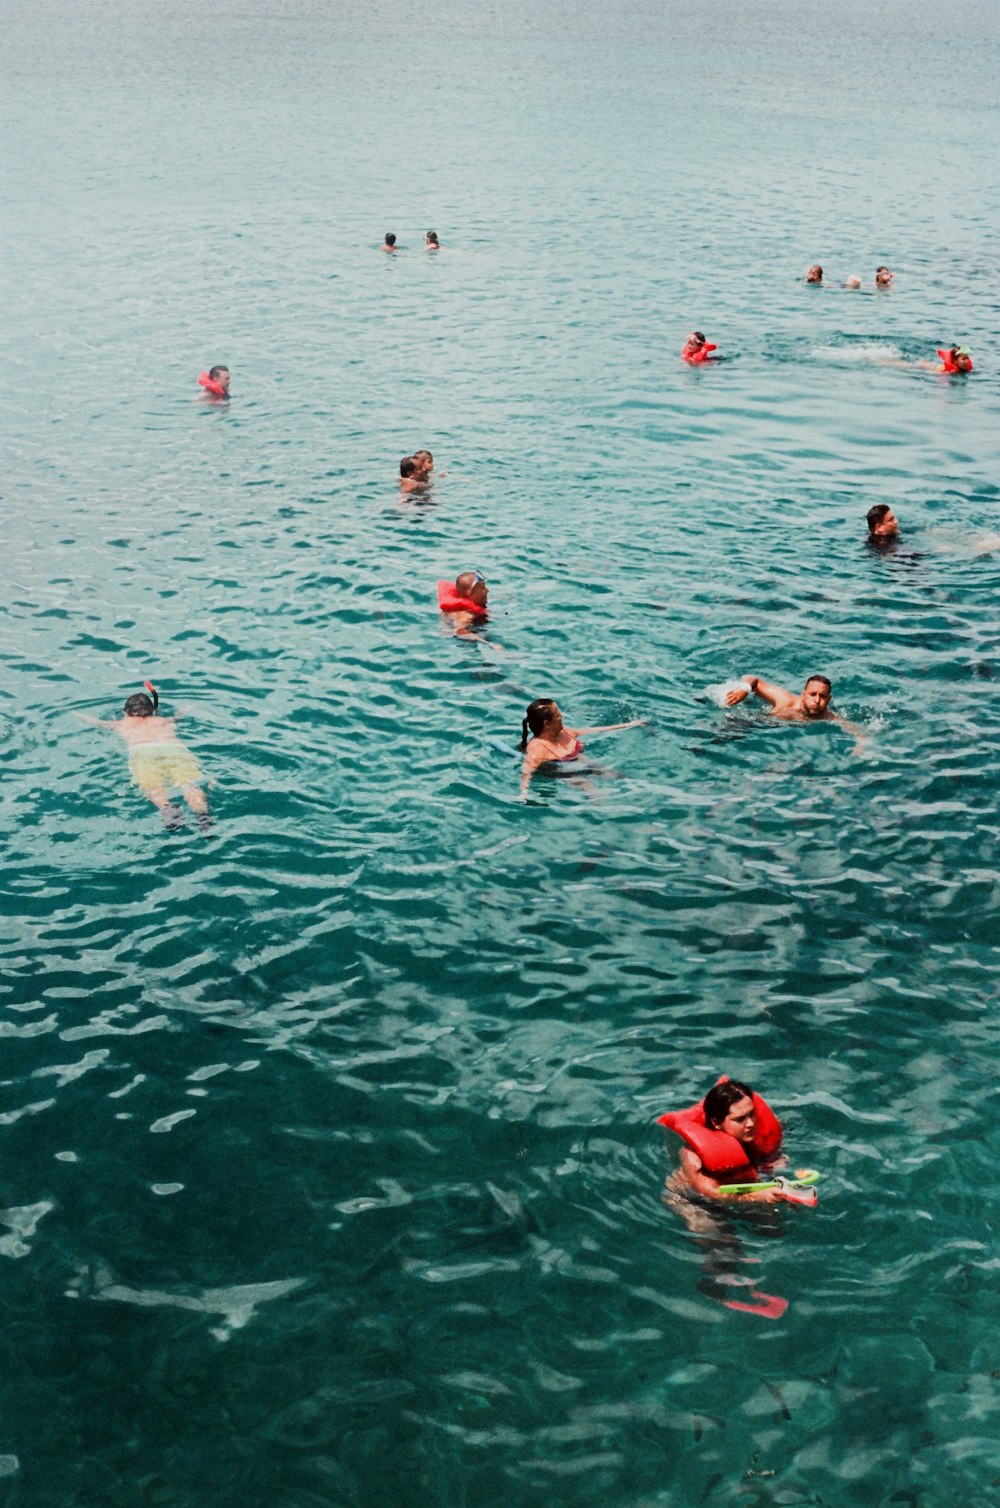 group of people swimming on water during daytime